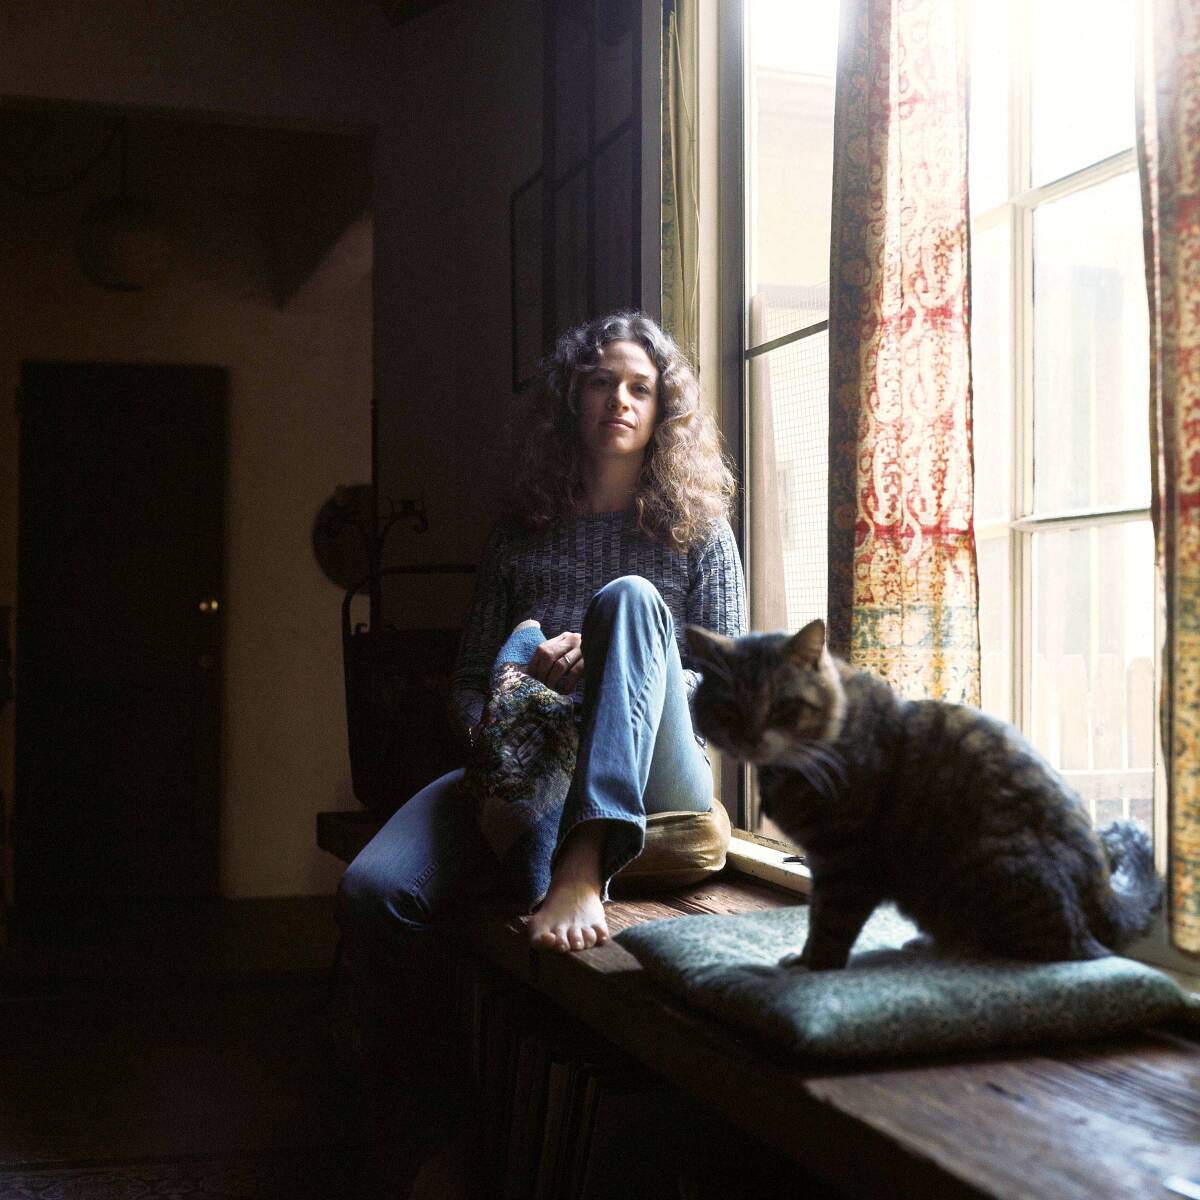 Carole King sits next to a window, with a cat.